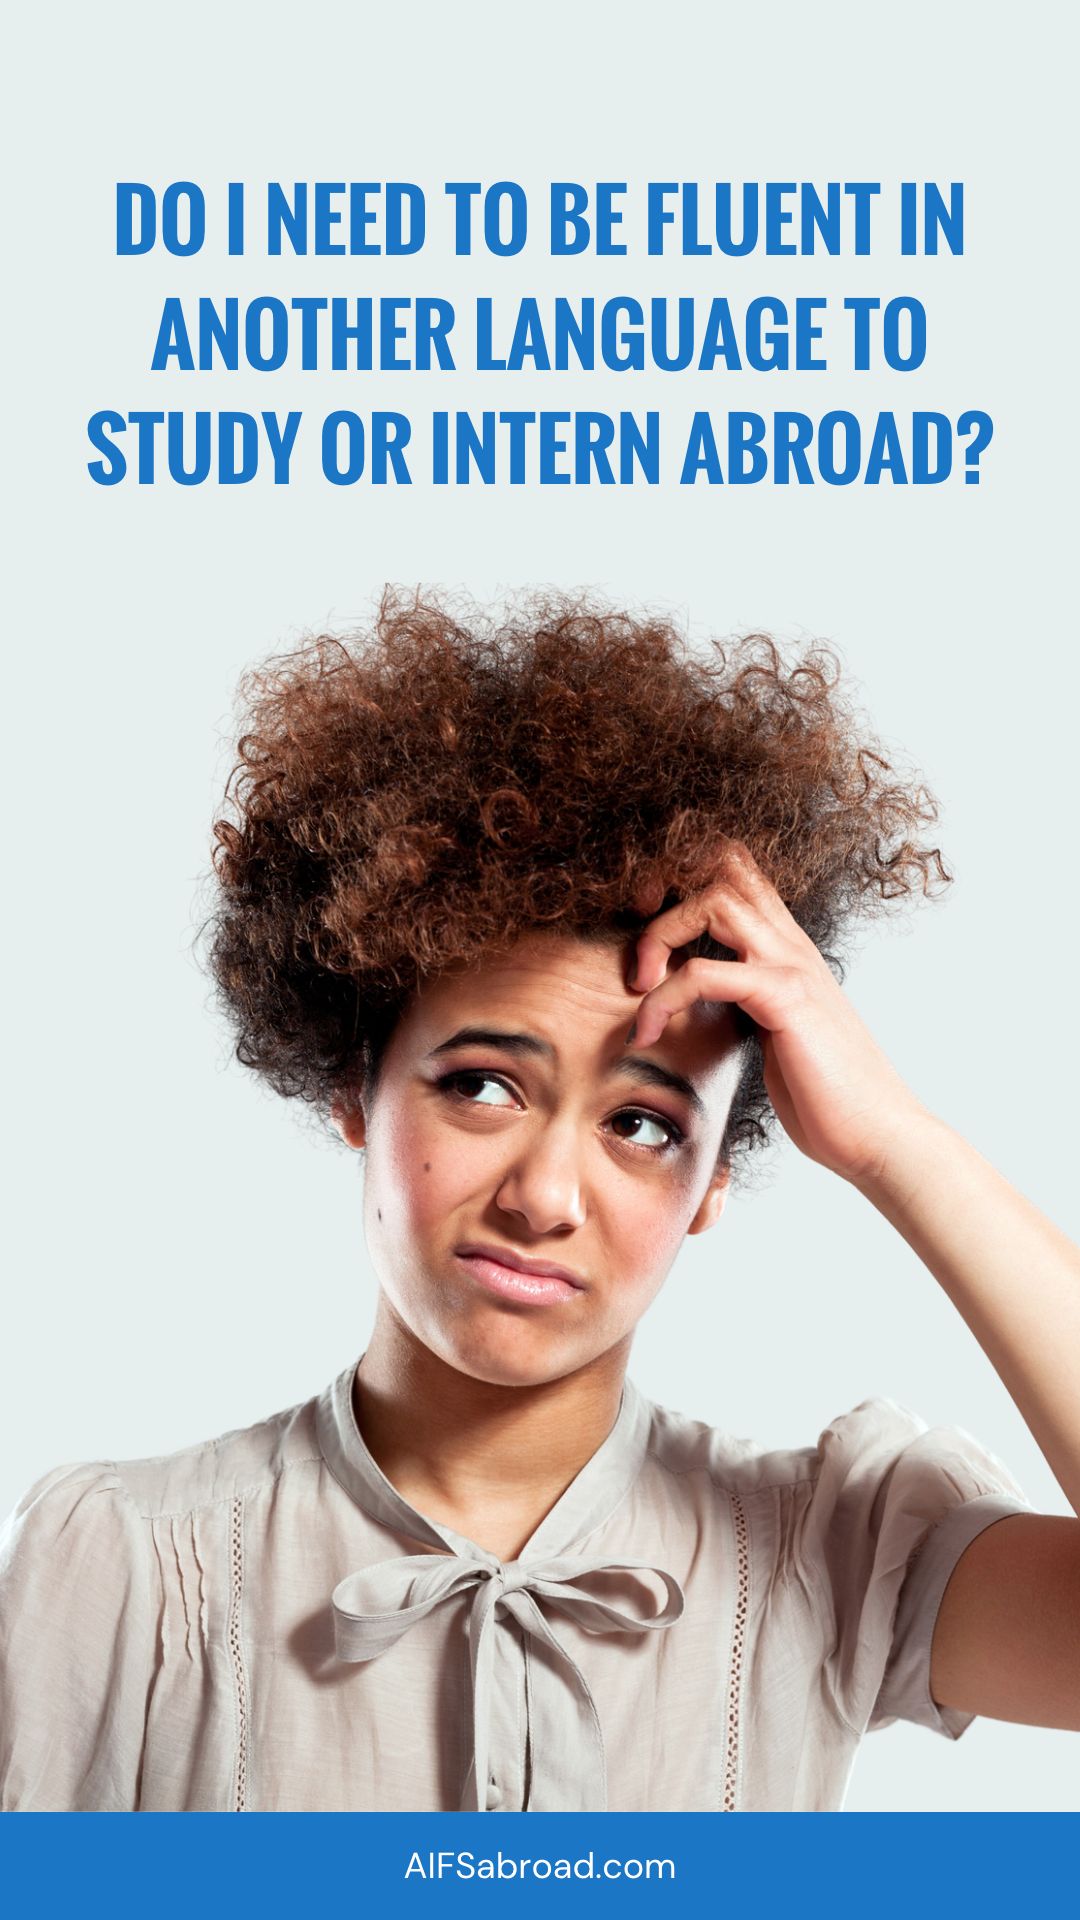 Pin image: Confused young woman with text saying "Do I need to be fluent in another language to study or intern abroad?"